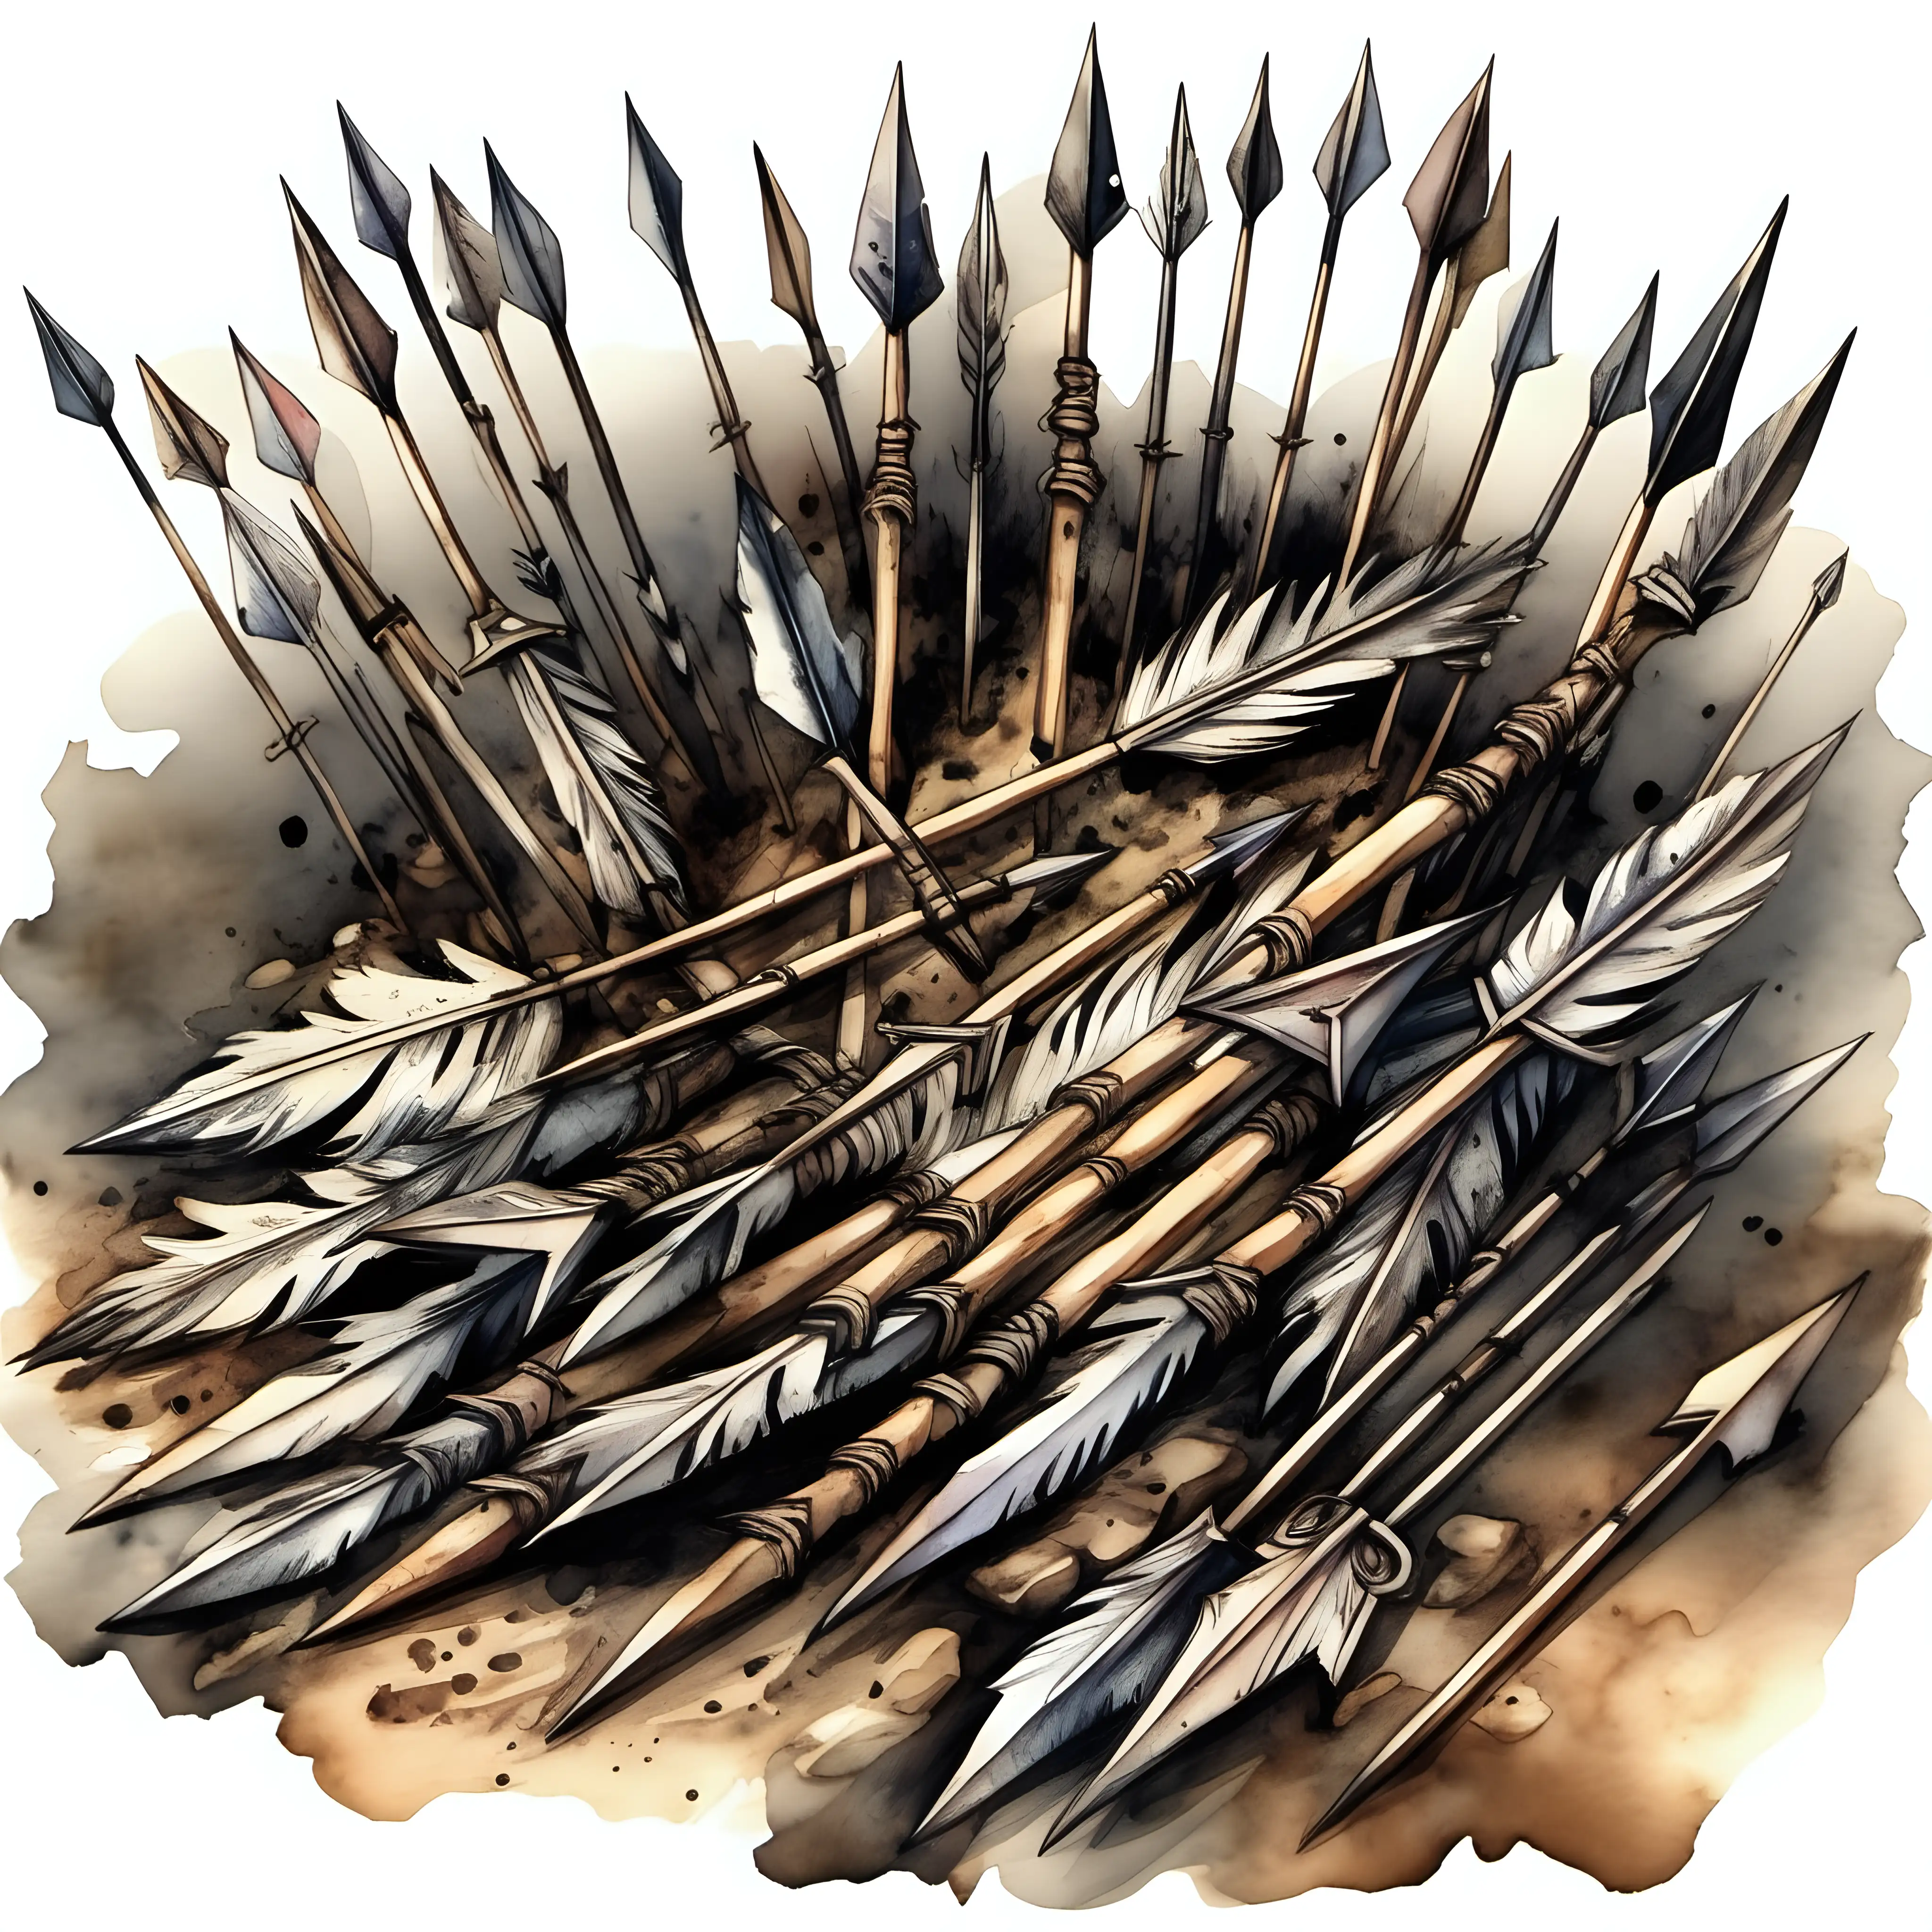 medieval pile of arrows with feathered ends on the ground, dark watercolor drawing, no background